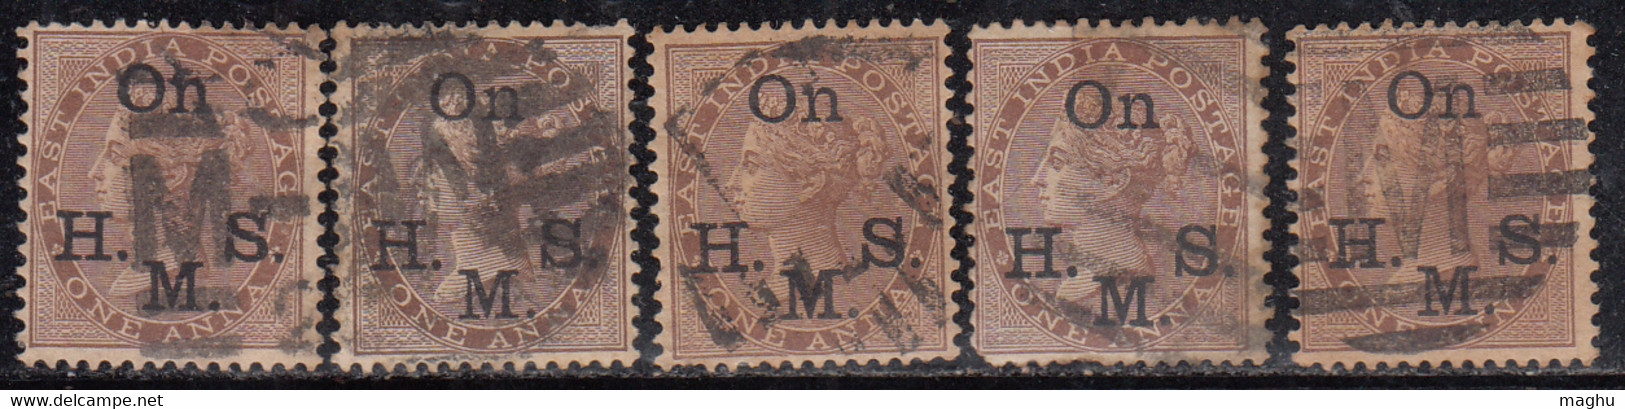 1a X 5 Diff., Shades Varities, British East India Used On H.M.S. Service, 1874, One Anna, Official. - 1854 Britse Indische Compagnie